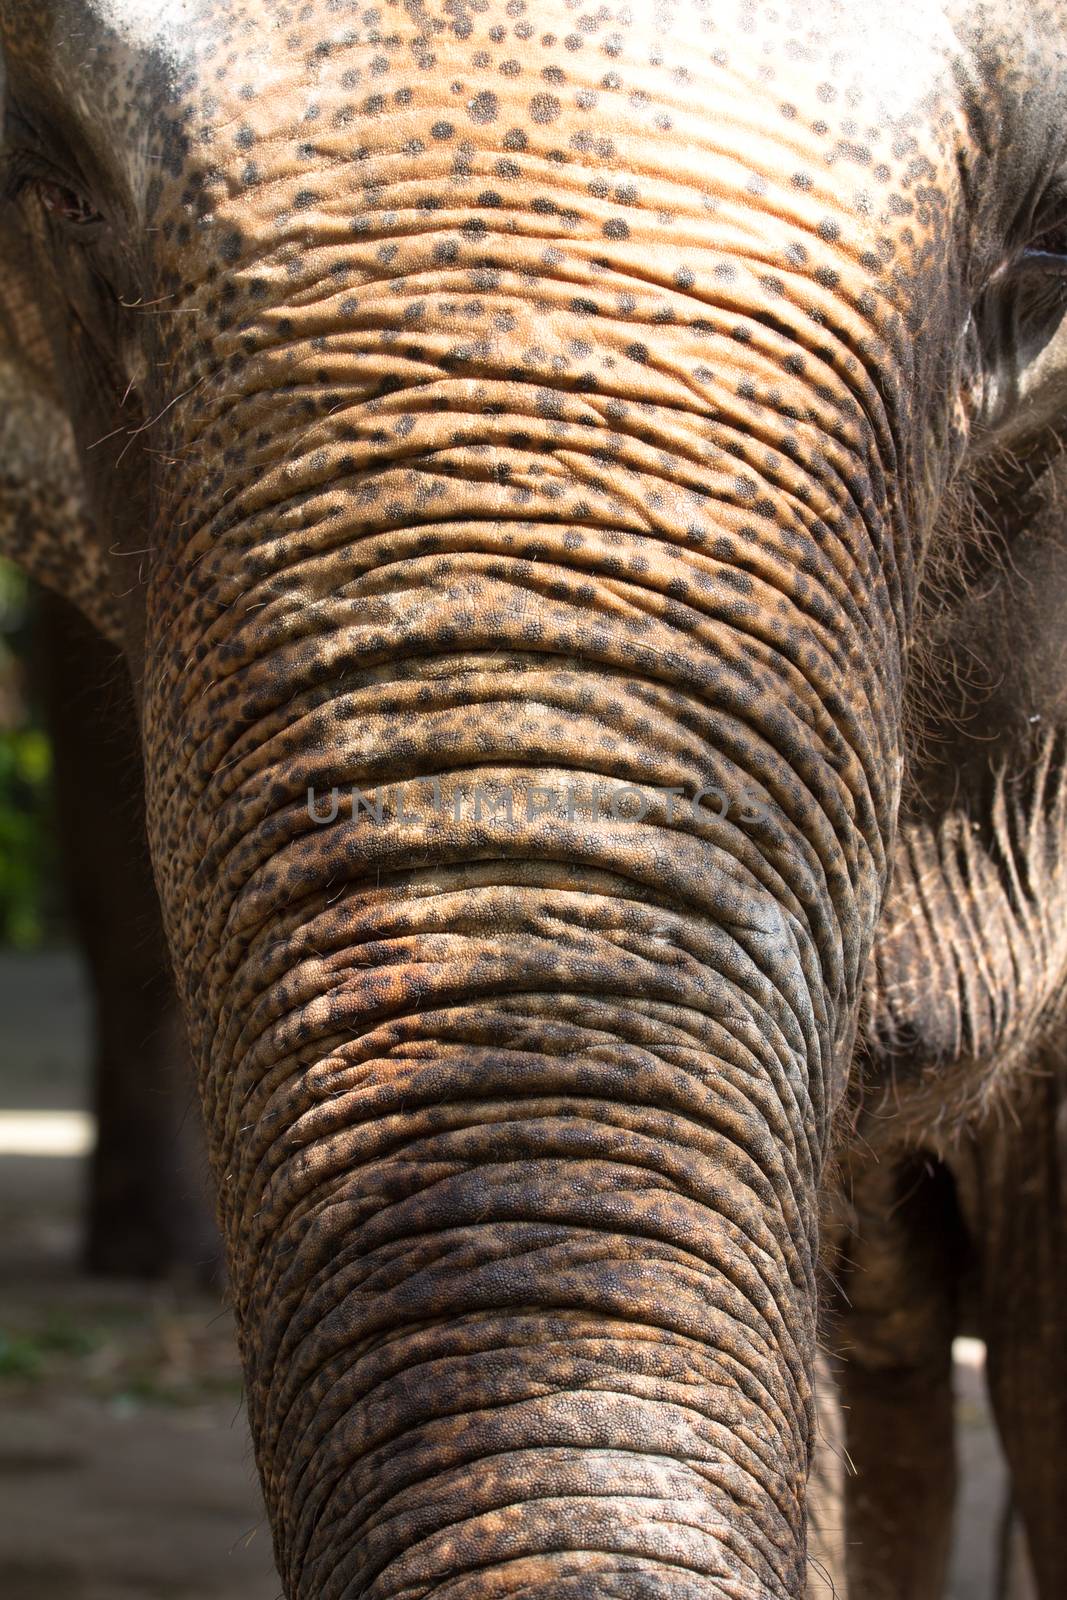 close-up of an Elephant head by wyoosumran